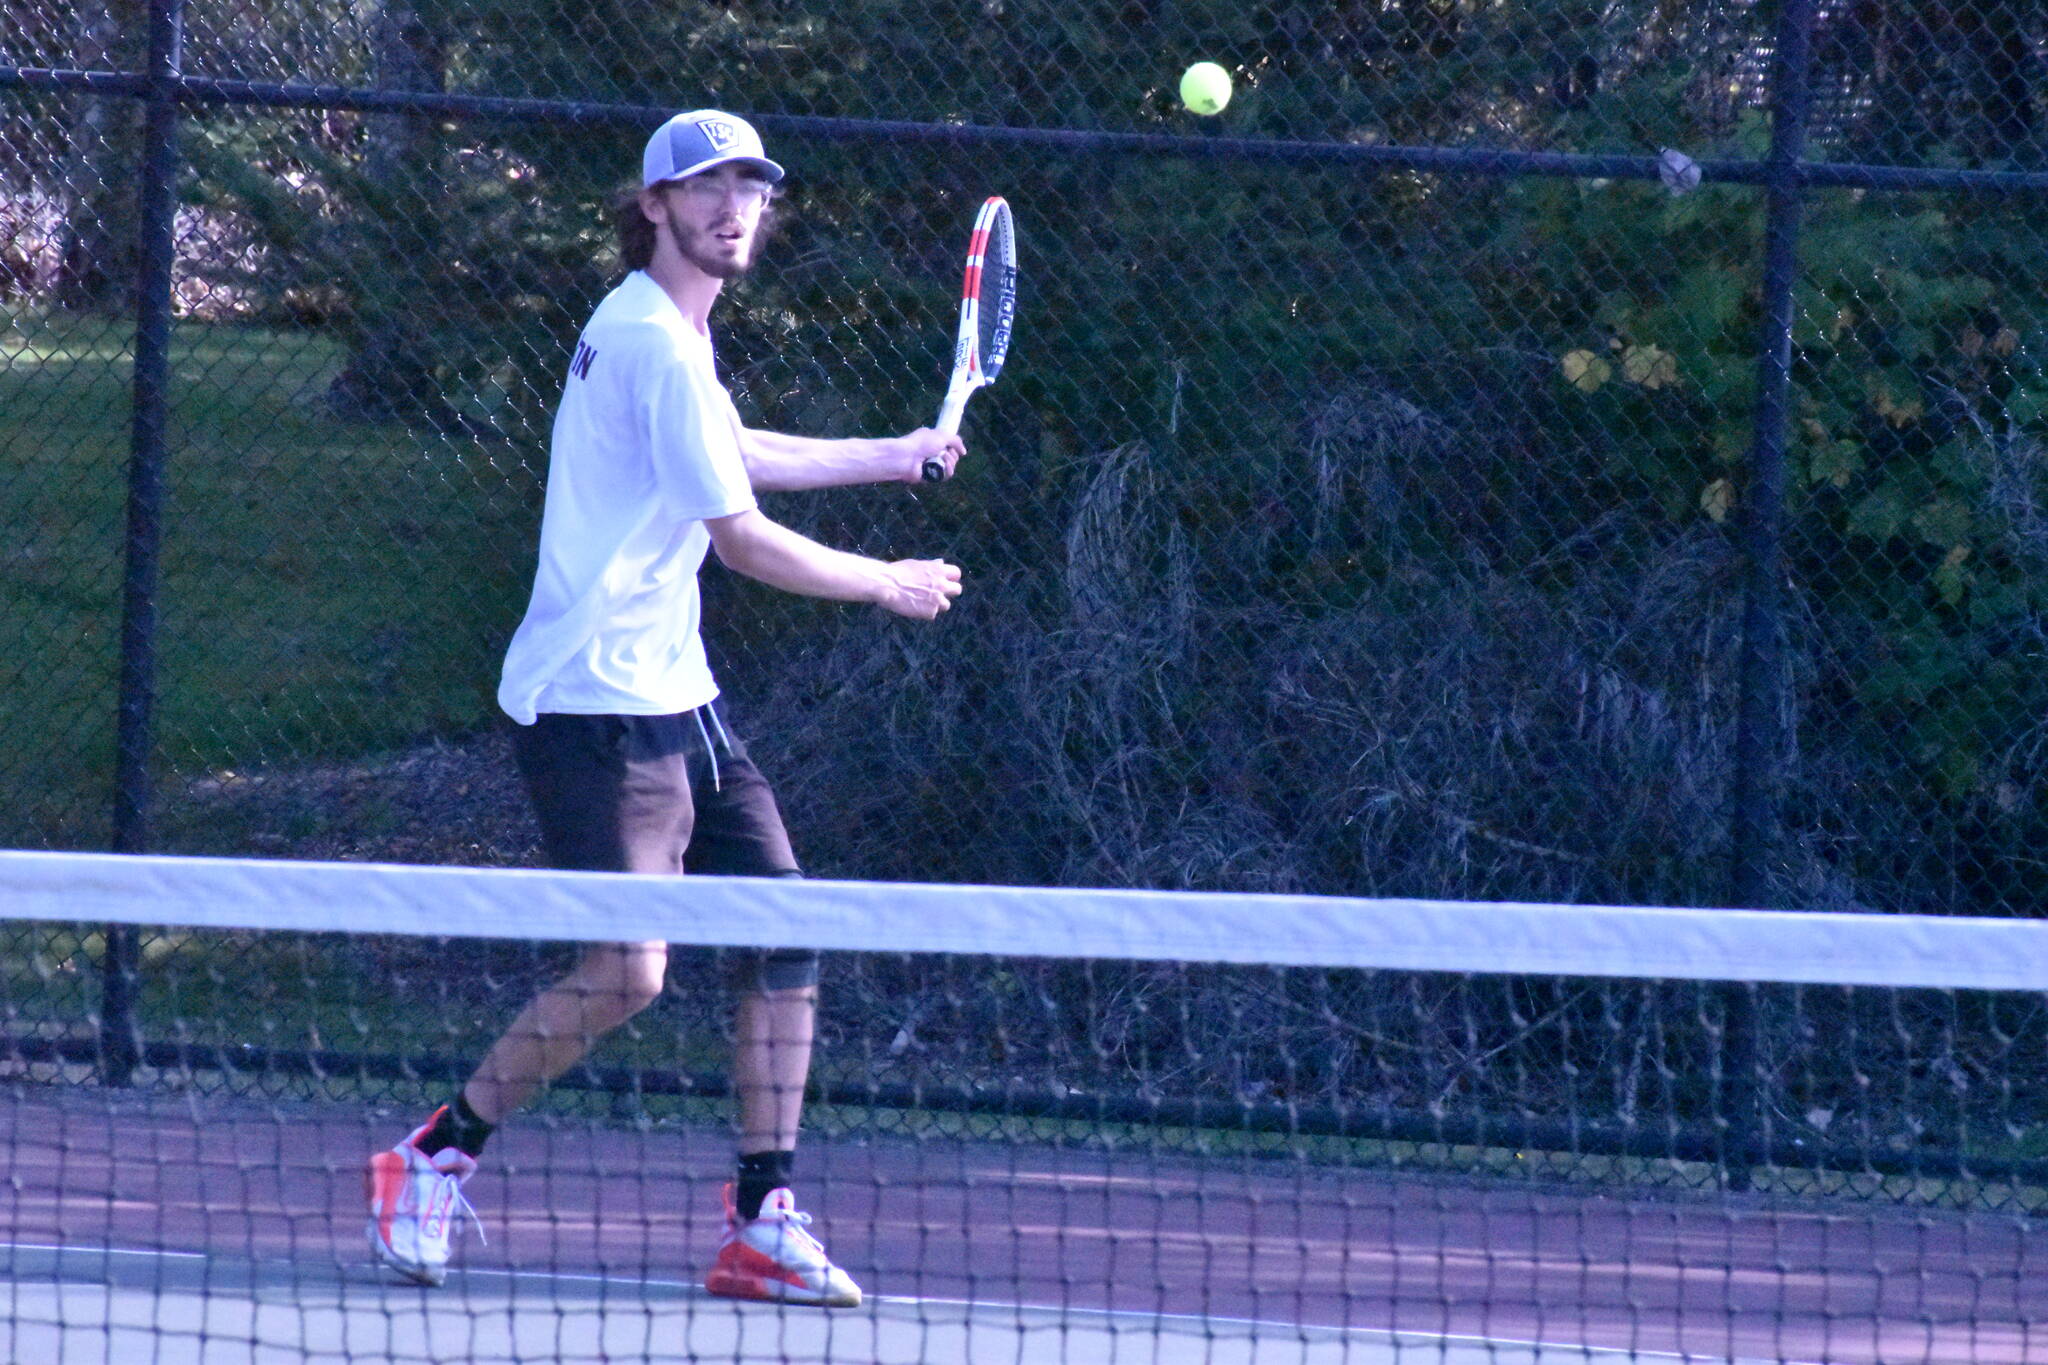 The White River High boys opened their tennis season Sept. 7 with a home-court match against the Fife Trojans. Playing No. 1 singles for the Hornets was Derek Brannon.